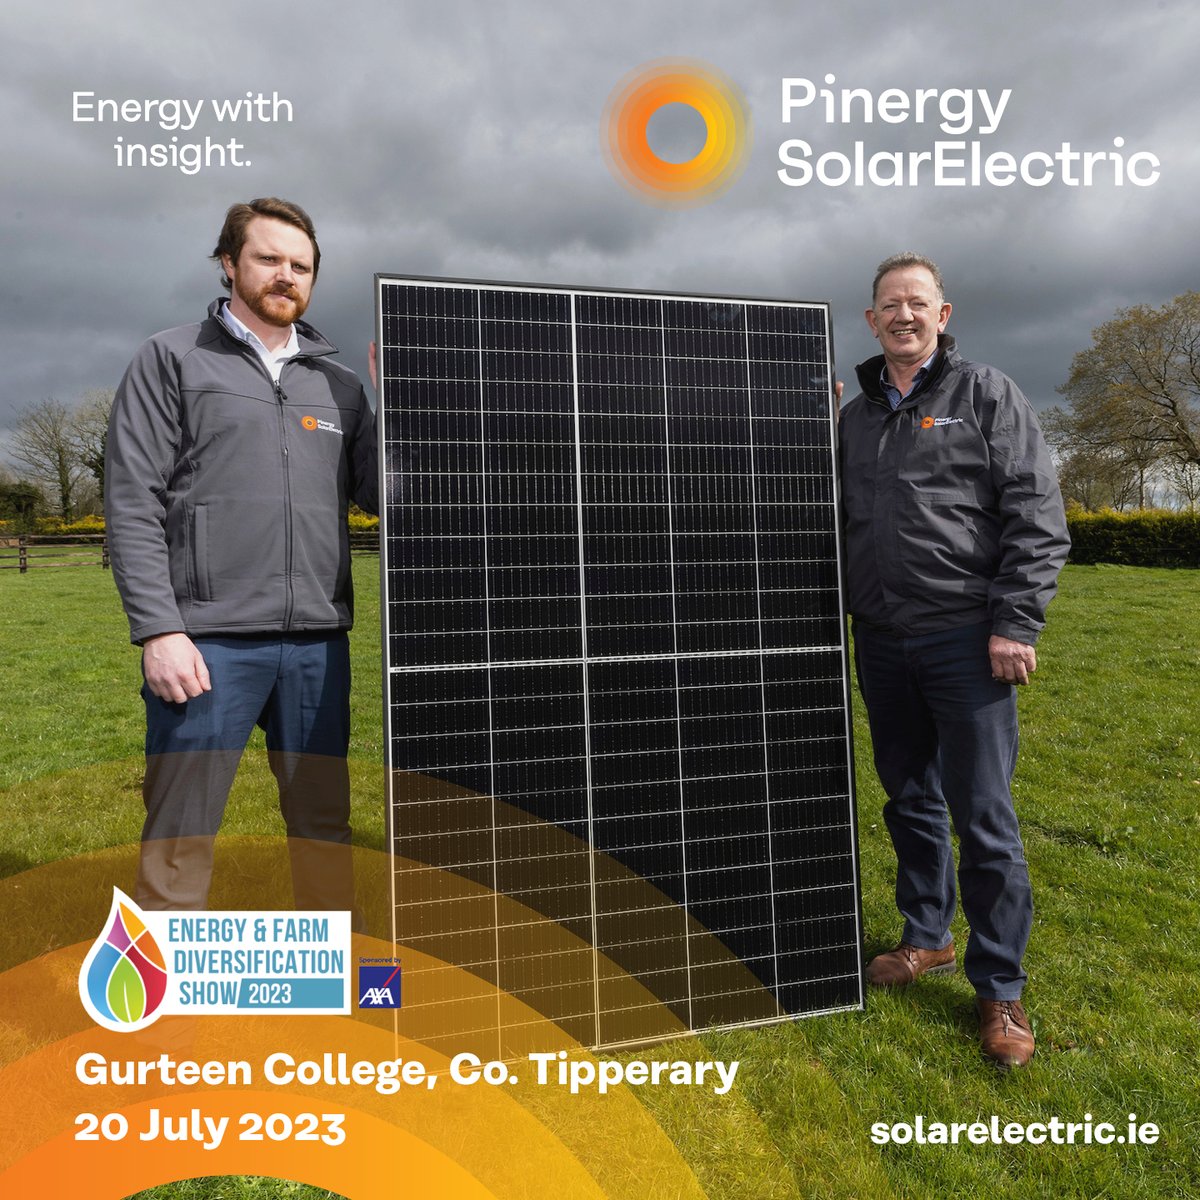 Join us tomorrow @EnergyinAgri - Pop by our stand & chat with our team about creating a sustainable energy future for your home and business.

Get in touch with us today & make the switch to #Solar

📩solar@pinergy.ie 🌐solarelectric.ie

#EnergyWithInsight
#Sustainability